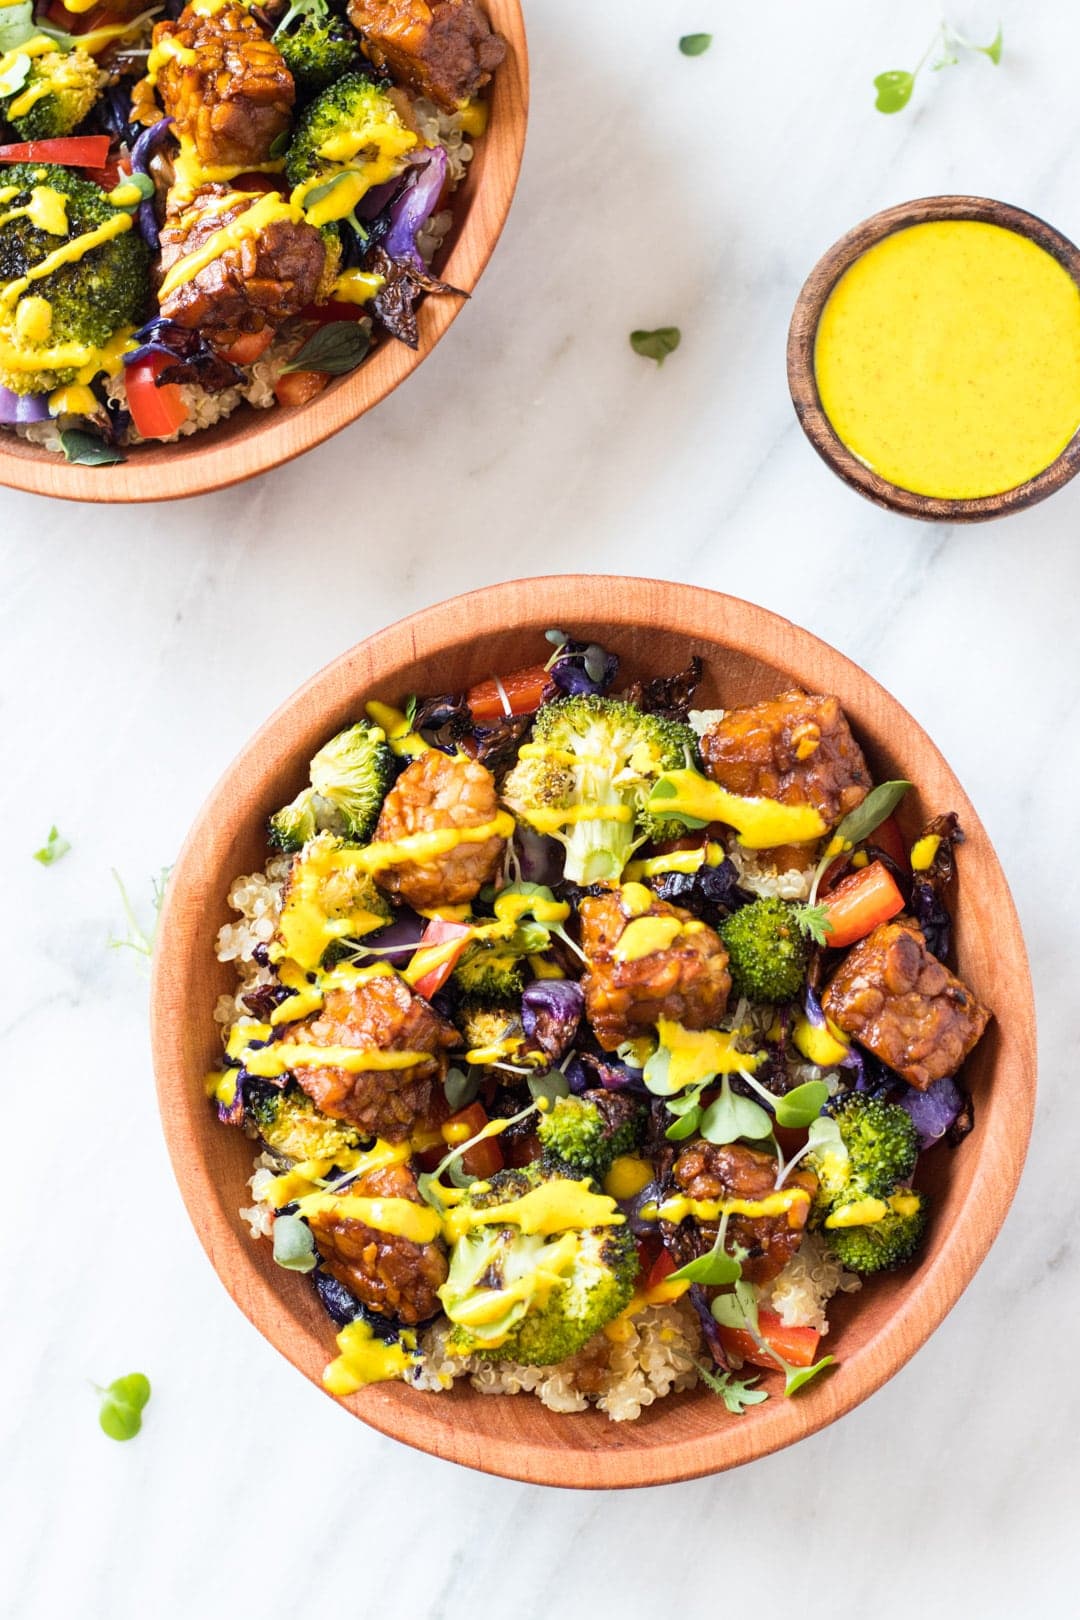 Two low FODMAP rainbow bliss bowls topped with a drizzle of turmeric-tahini dressing